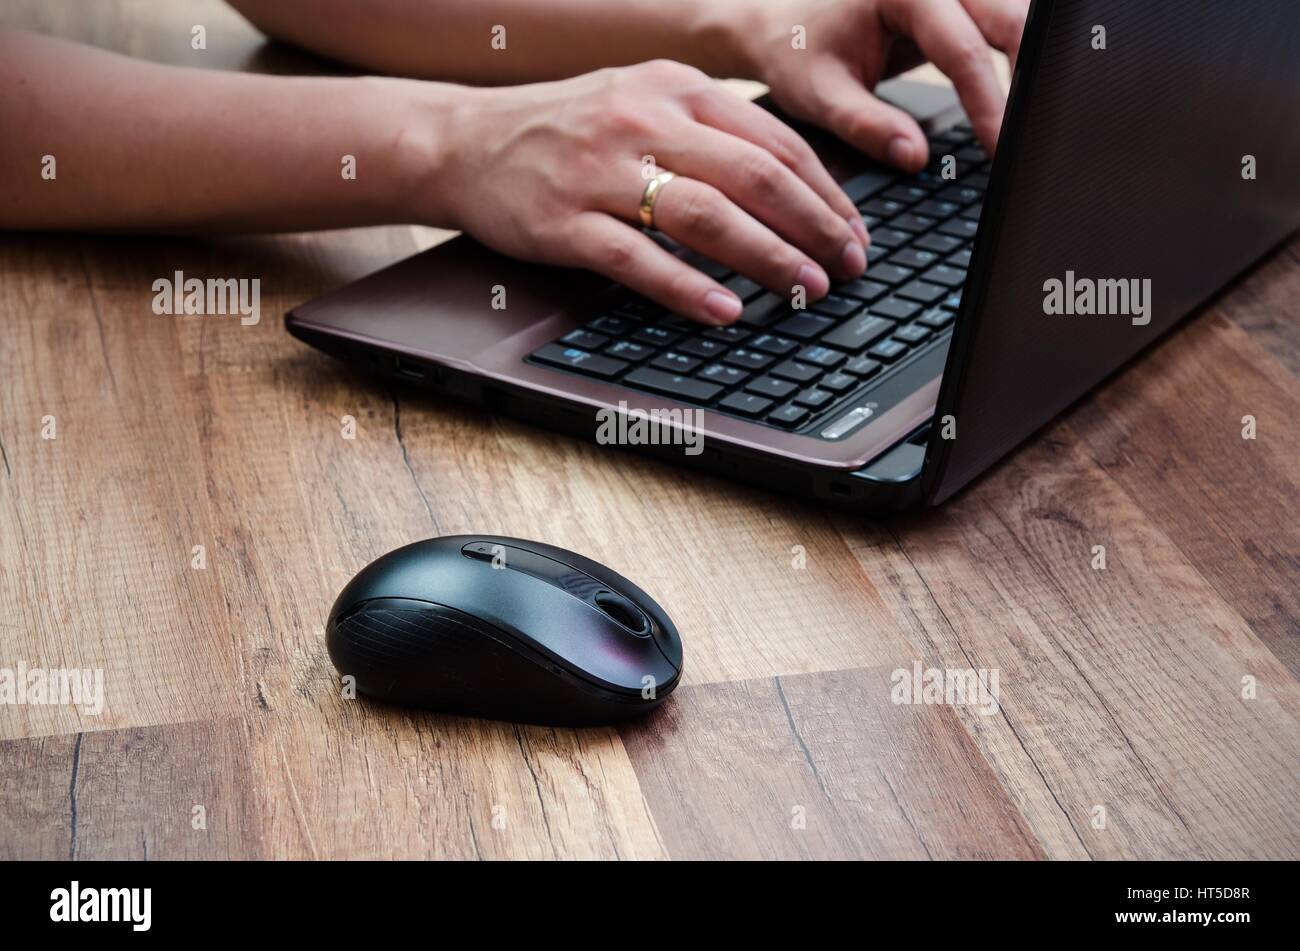 Man working with laptop on wooden background Stock Photo